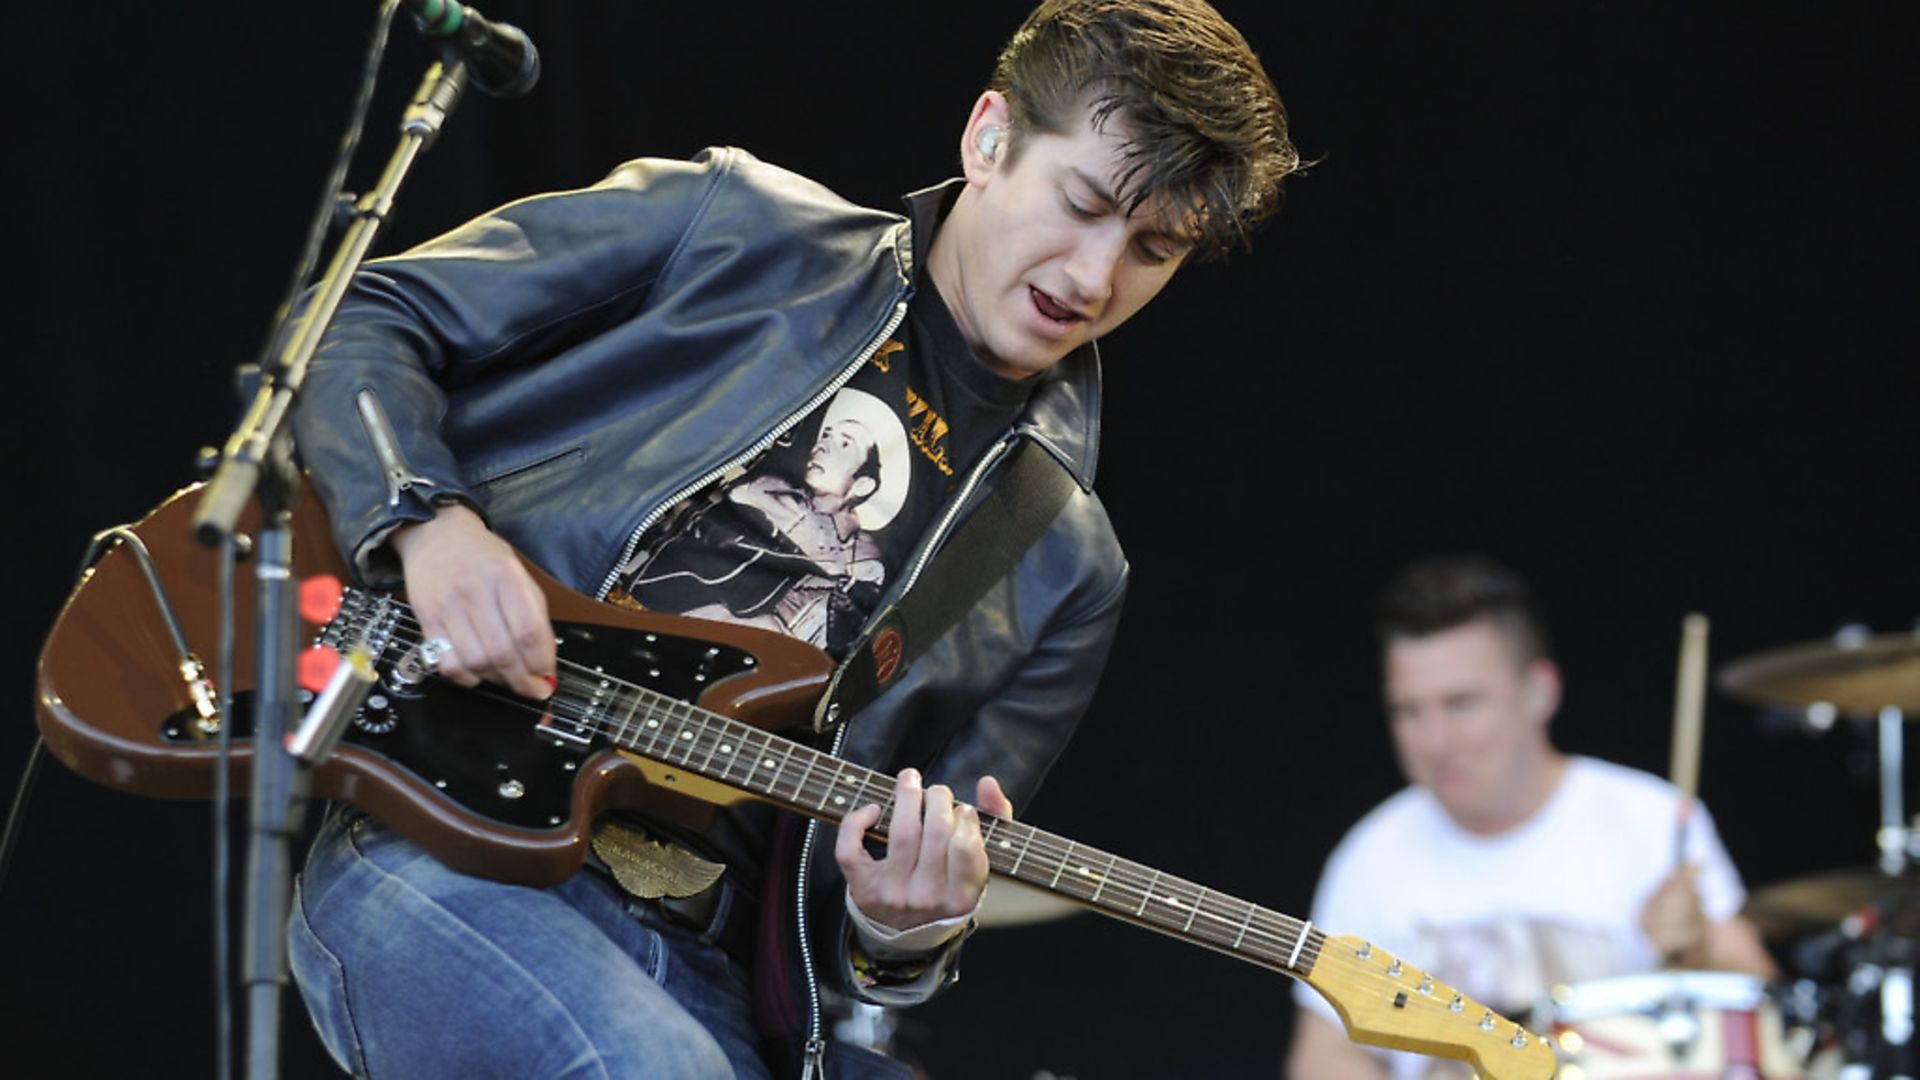 Alex Turner of Arctic Monkeys performs at day two of the Outside Lands Music and Art Festival at Golden Gate Park on August 13, 2011 in San Francisco, California. Photo: Tim Mosenfelder/Getty Images - Credit: Getty Images